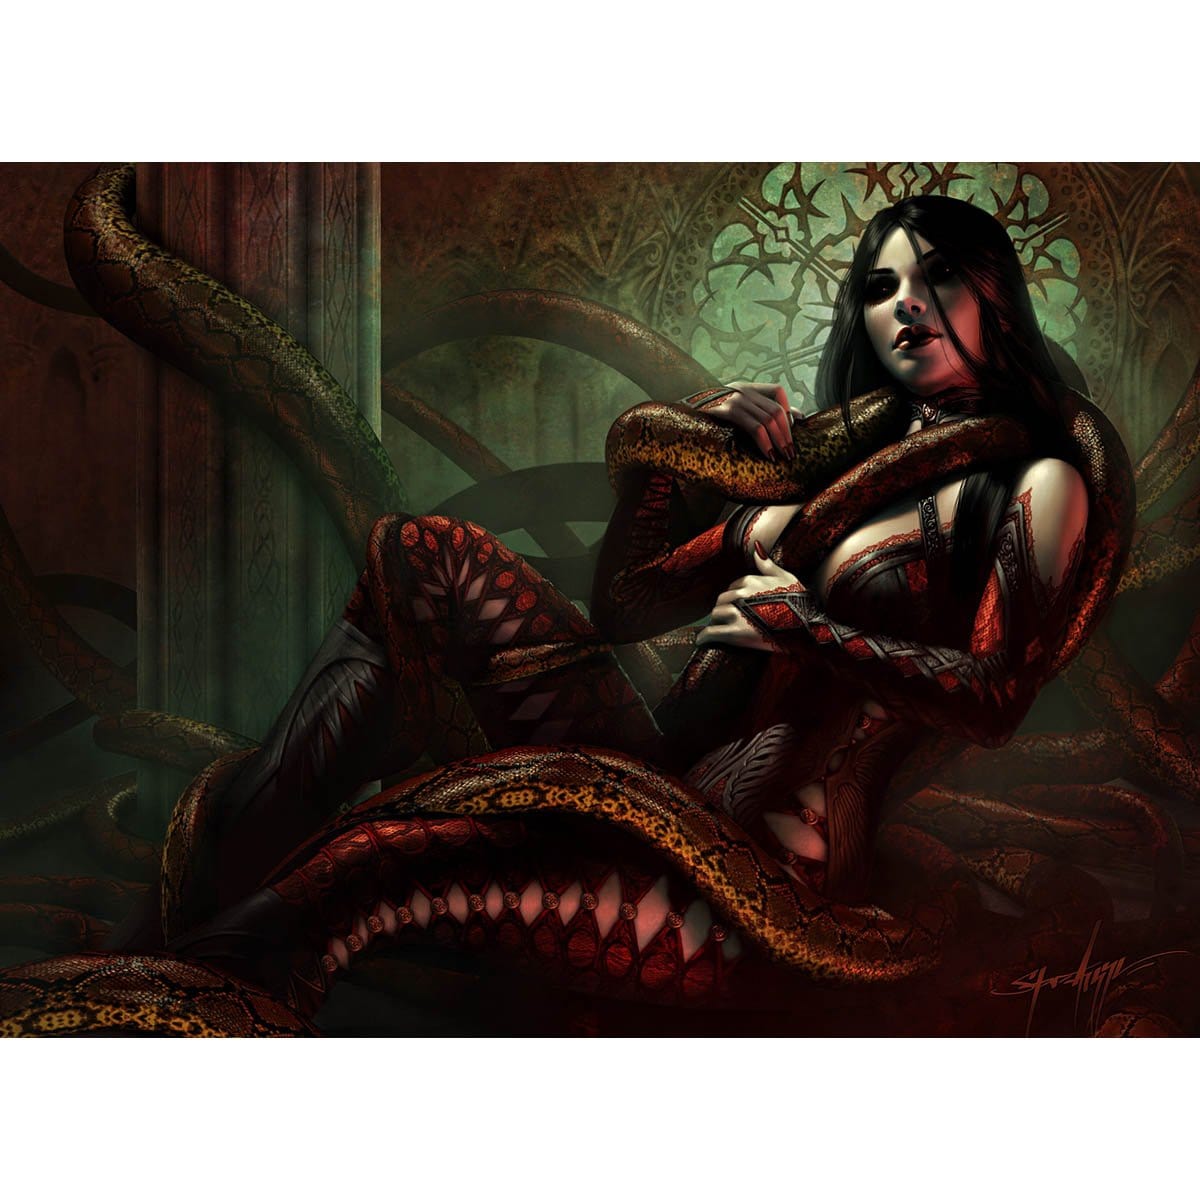 Deadly Allure Print - Print - Original Magic Art - Accessories for Magic the Gathering and other card games